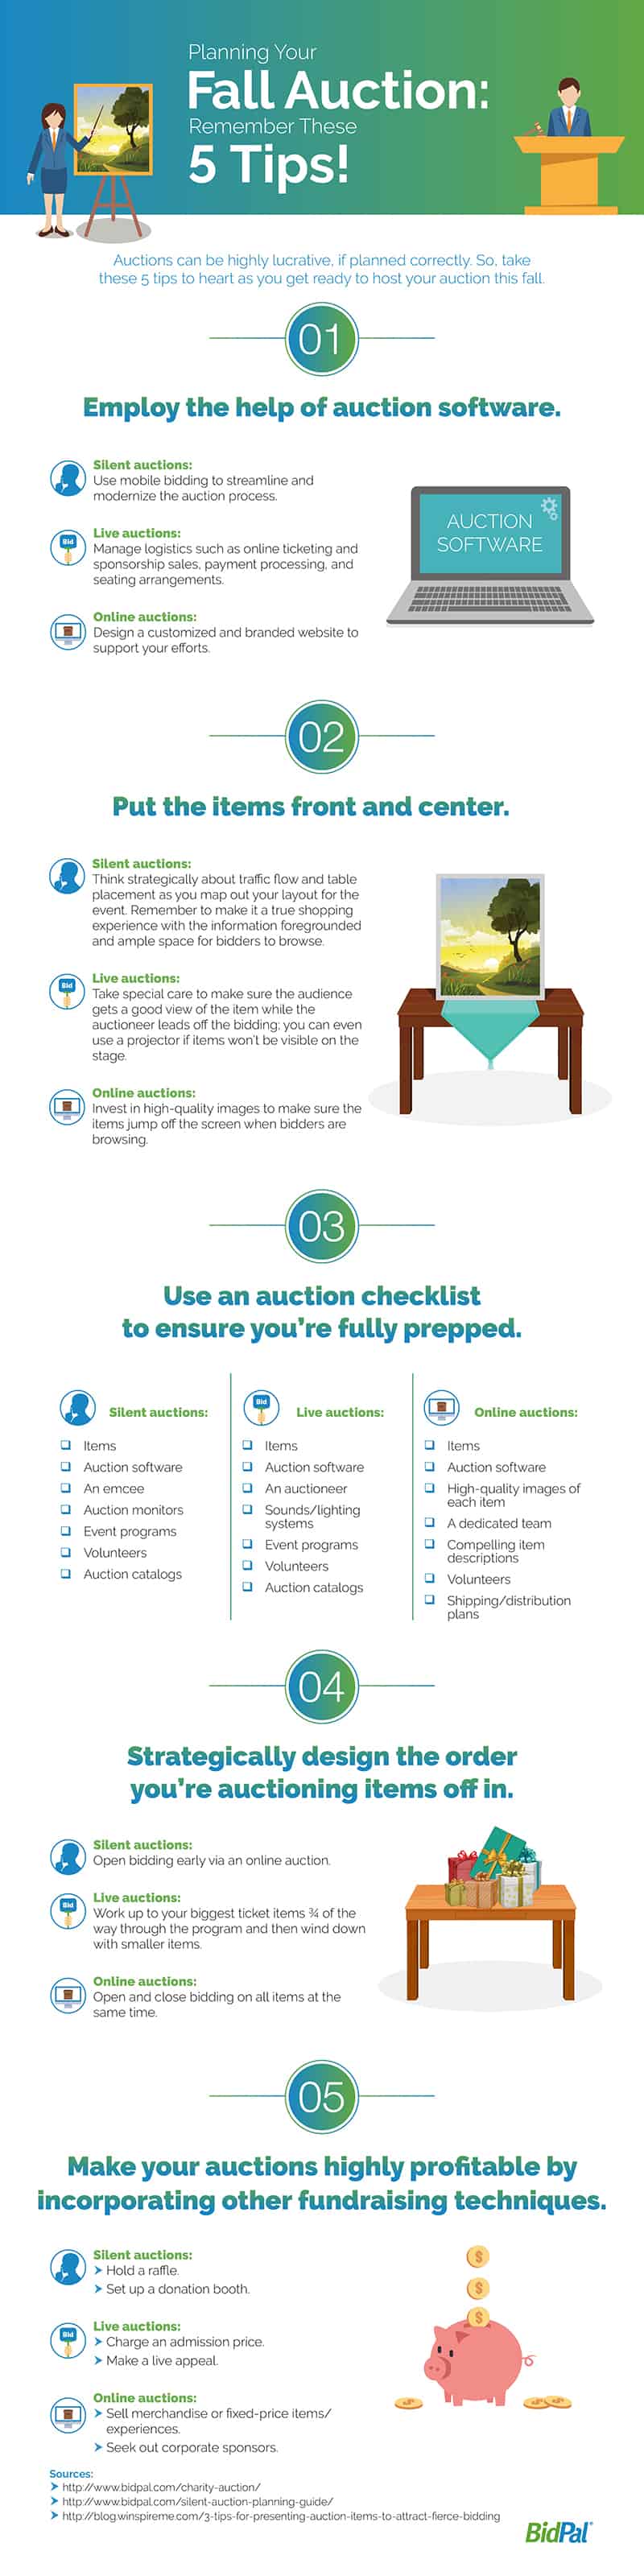 5 Tips for a Fall Auction 1. Employ the help of auction software 2. put the items front and center 3. use an auction checklist to ensure you're fully prepped 4. strategically design the order you're auctioning items off in 5. make your auctions highly profitable by incorporating other funding techniques